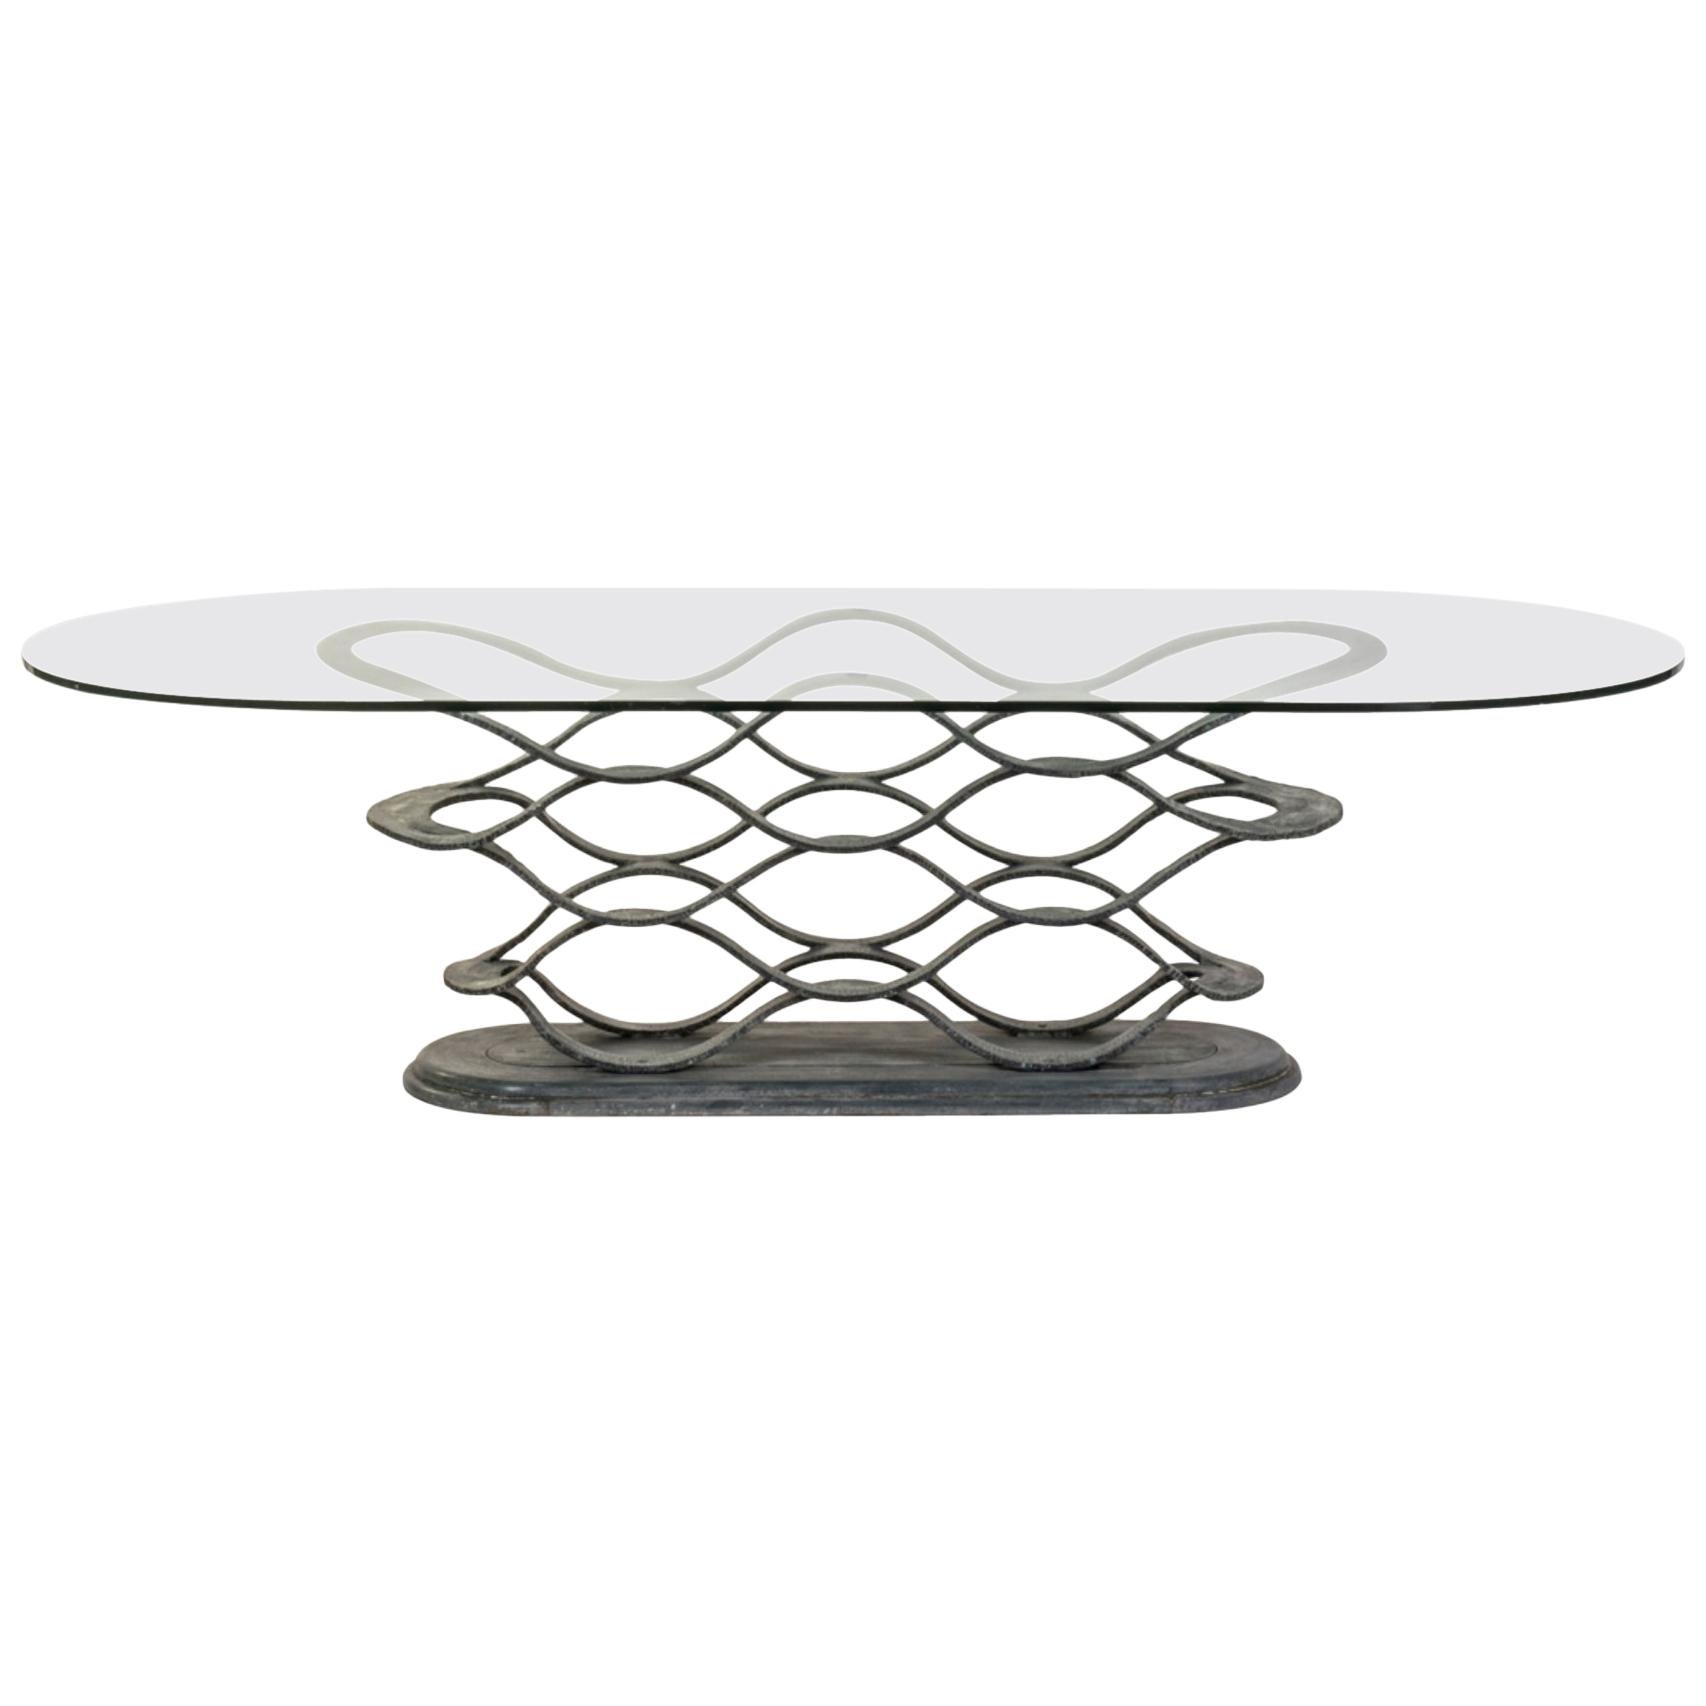 Neolitico Dining Table by Reflex